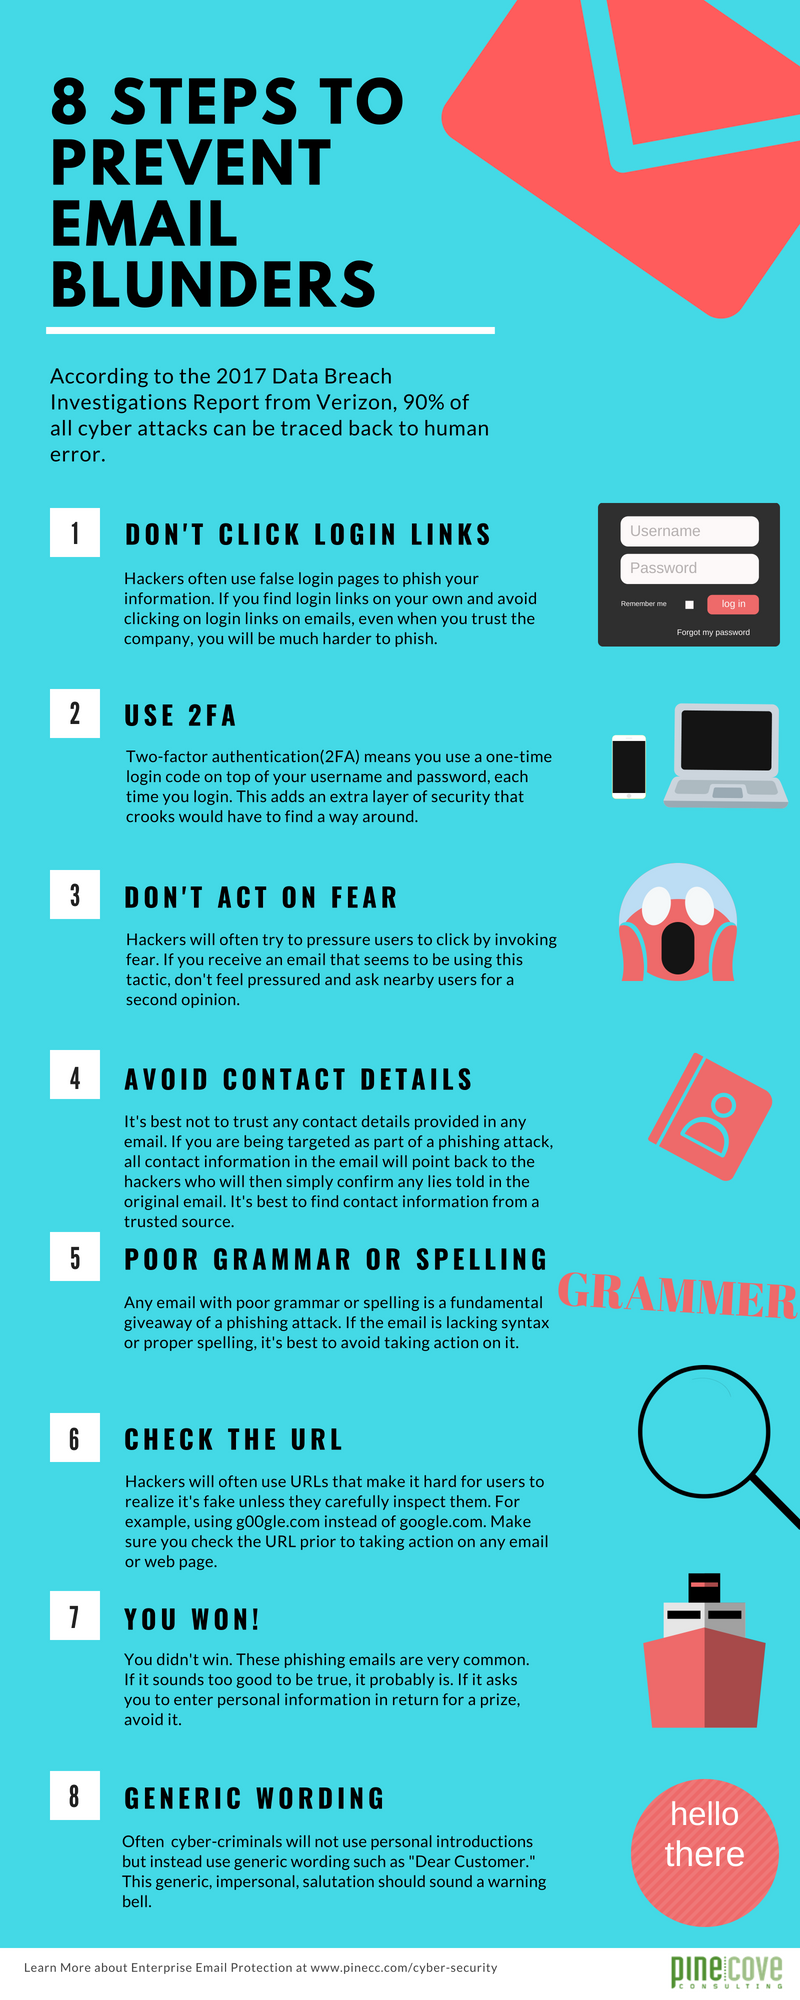 8 Steps to Prevent Email Blunders